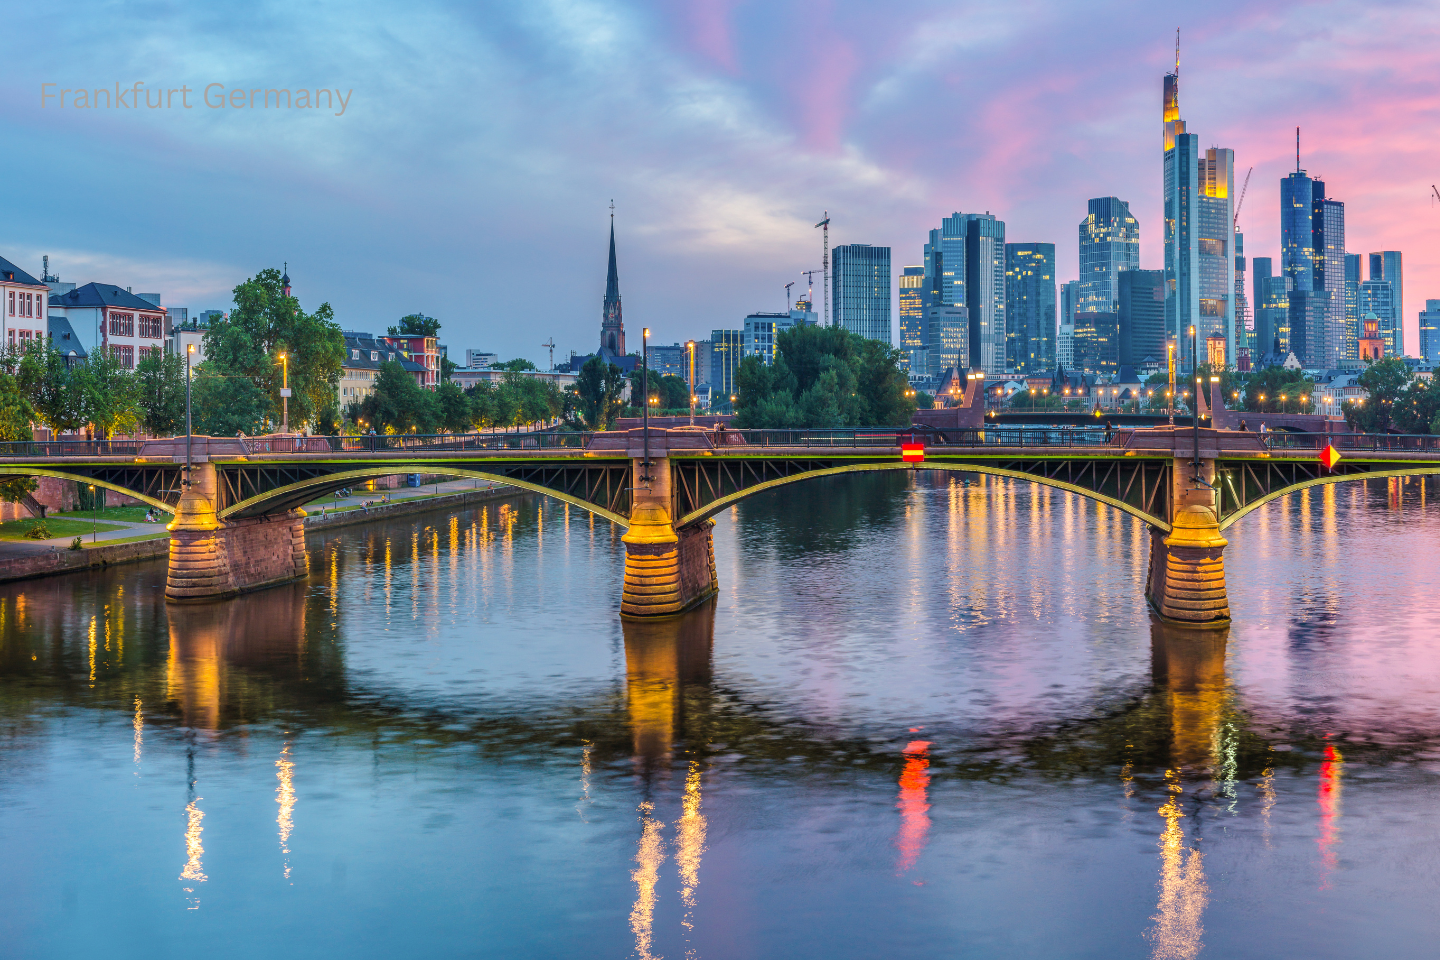 Discovering Frankfurt Germany: A Journey through Finance, Culture, and History